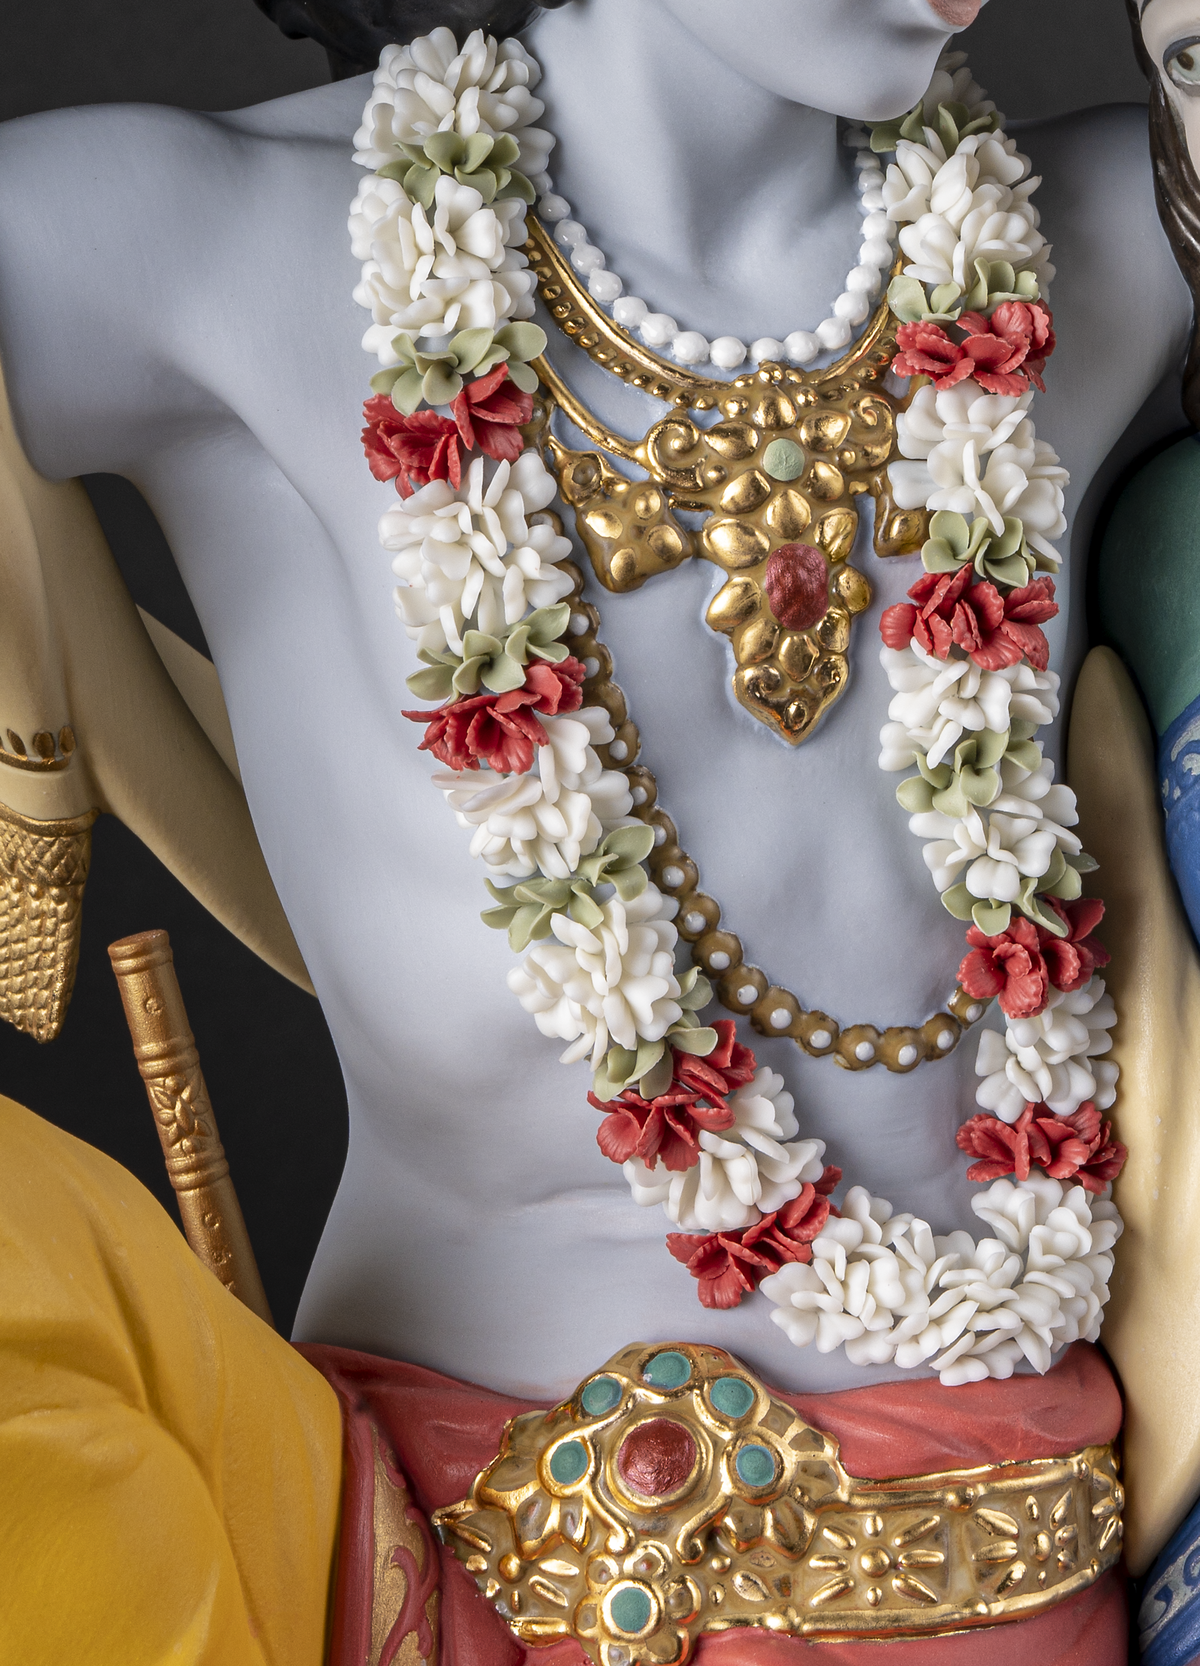 In the Radha-Krishna sculpture, each flower petal is made by hand and then positioned on the piece. 